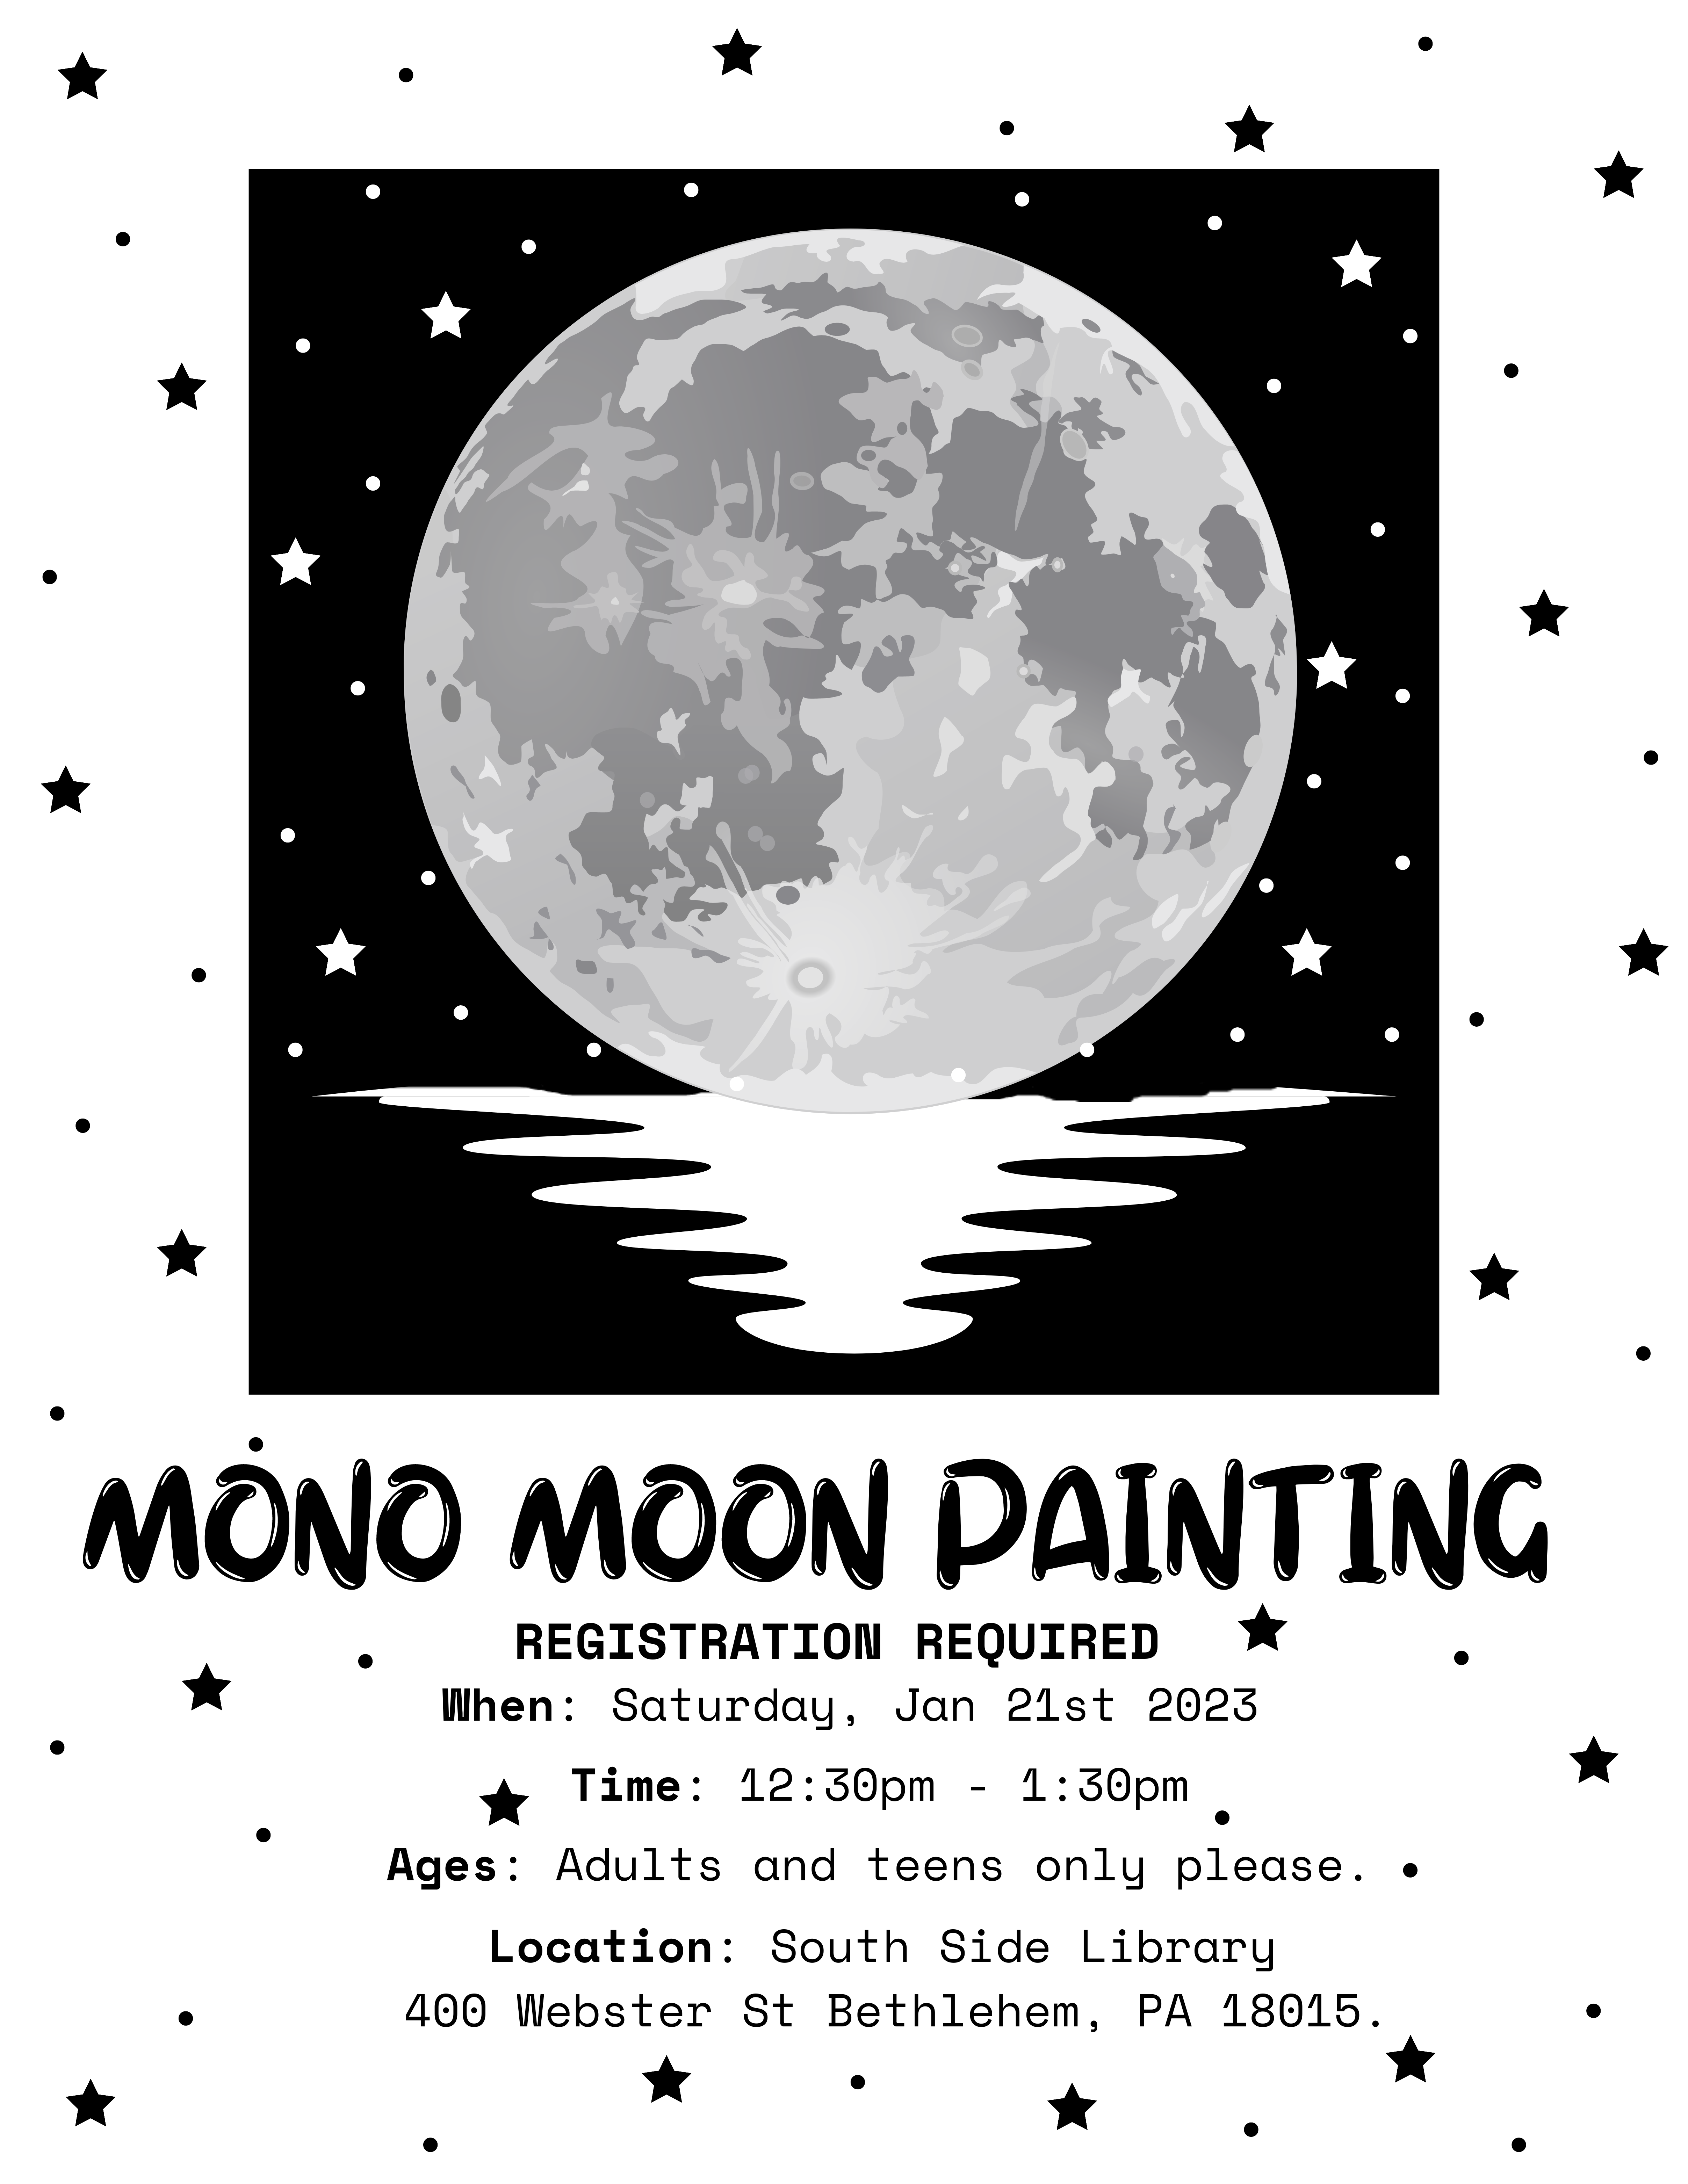 Mono Moon Painting Class on January 21st 2023 at 12:30pm. This event is for adults and teens. Registration required.